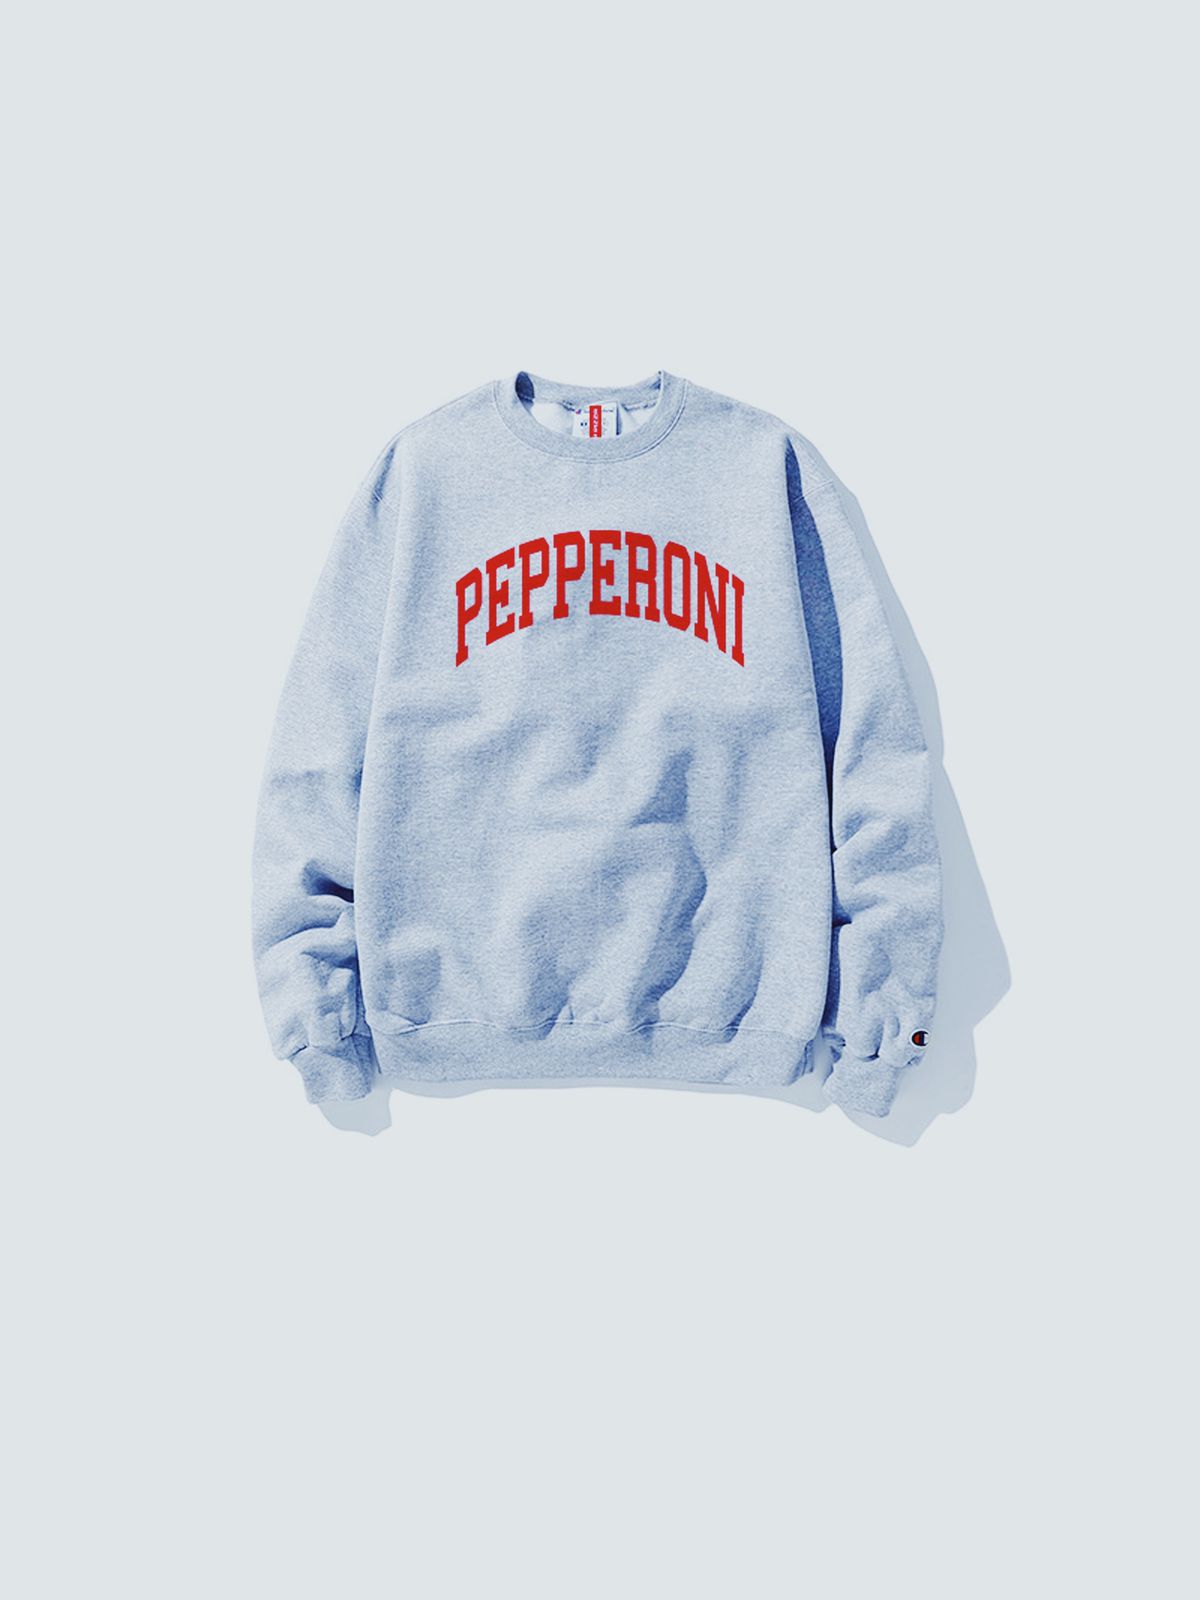 A grey sweatshirt with red collegiate lettering that reads “PEPPERONI”